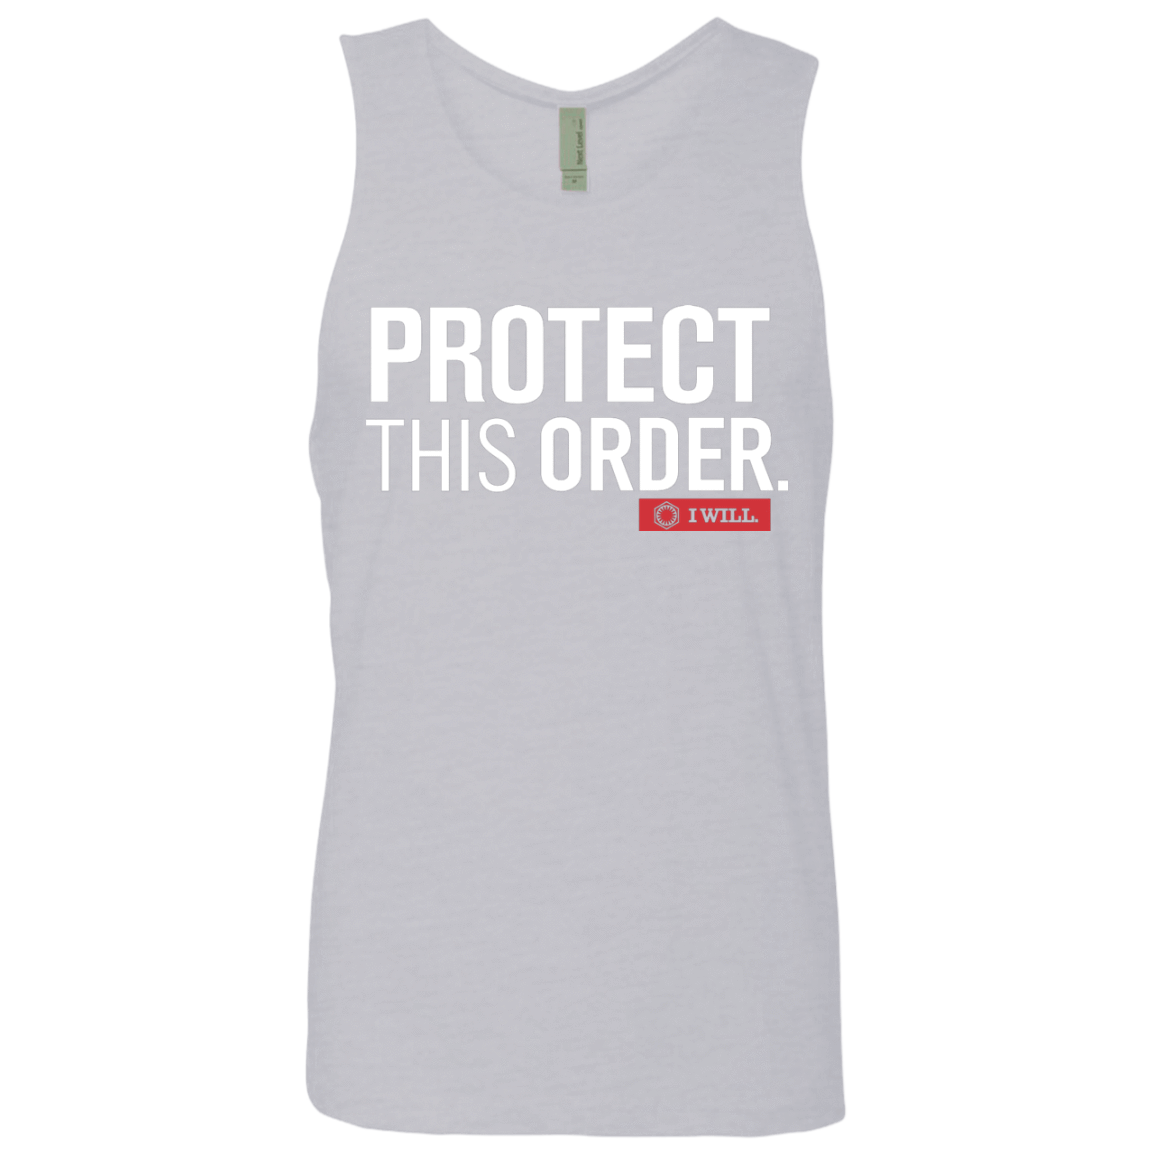 T-Shirts Heather Grey / Small Protect This Order Men's Premium Tank Top